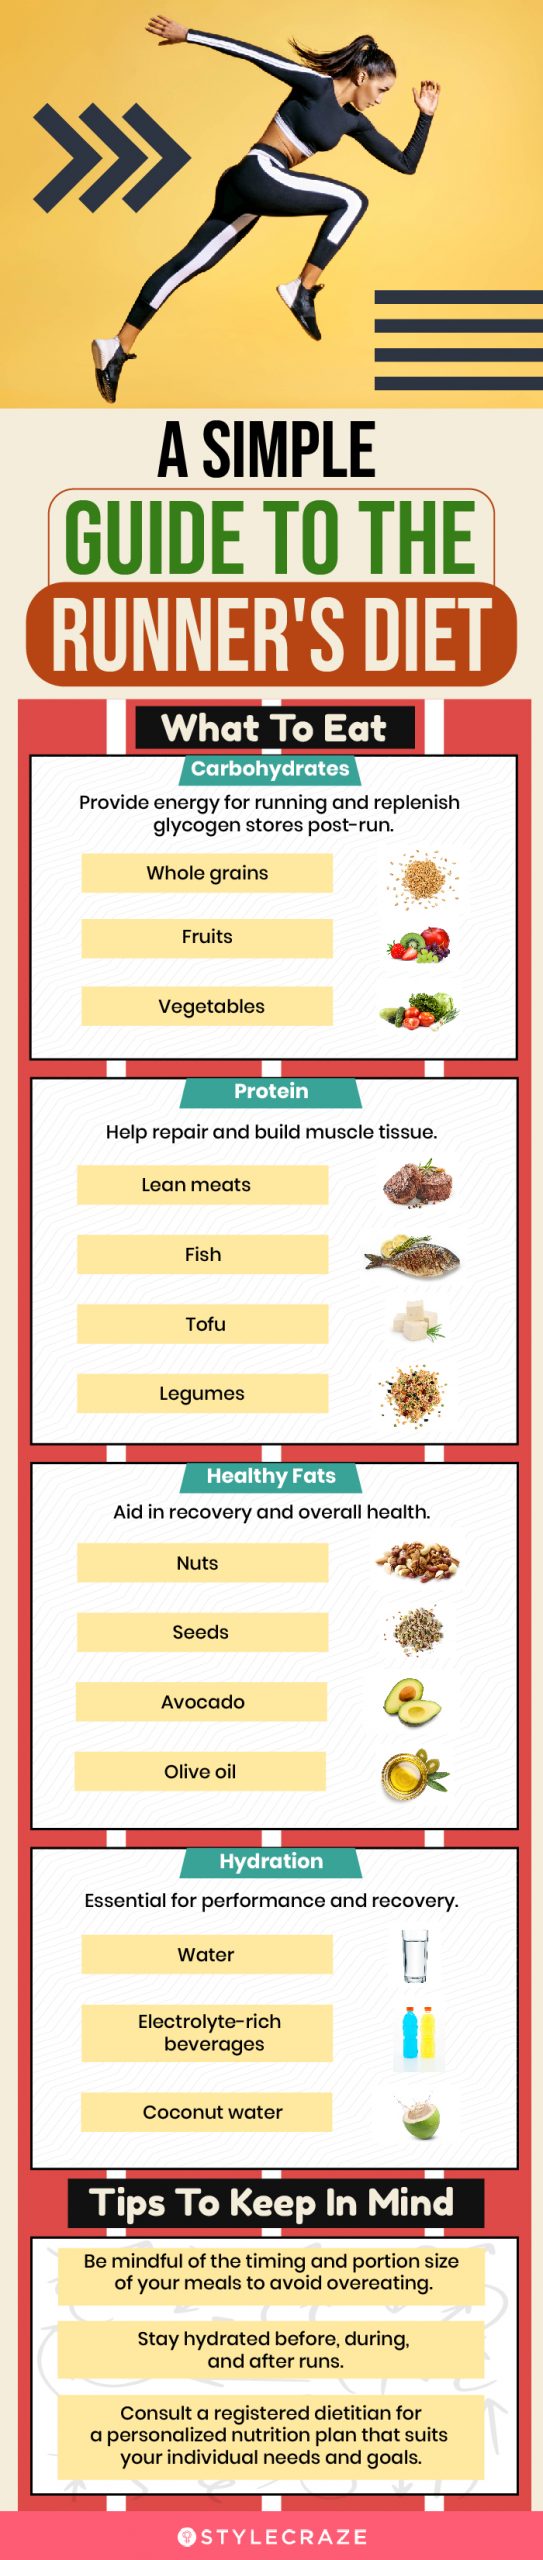 a simple guide to the runner's diet (infographic)